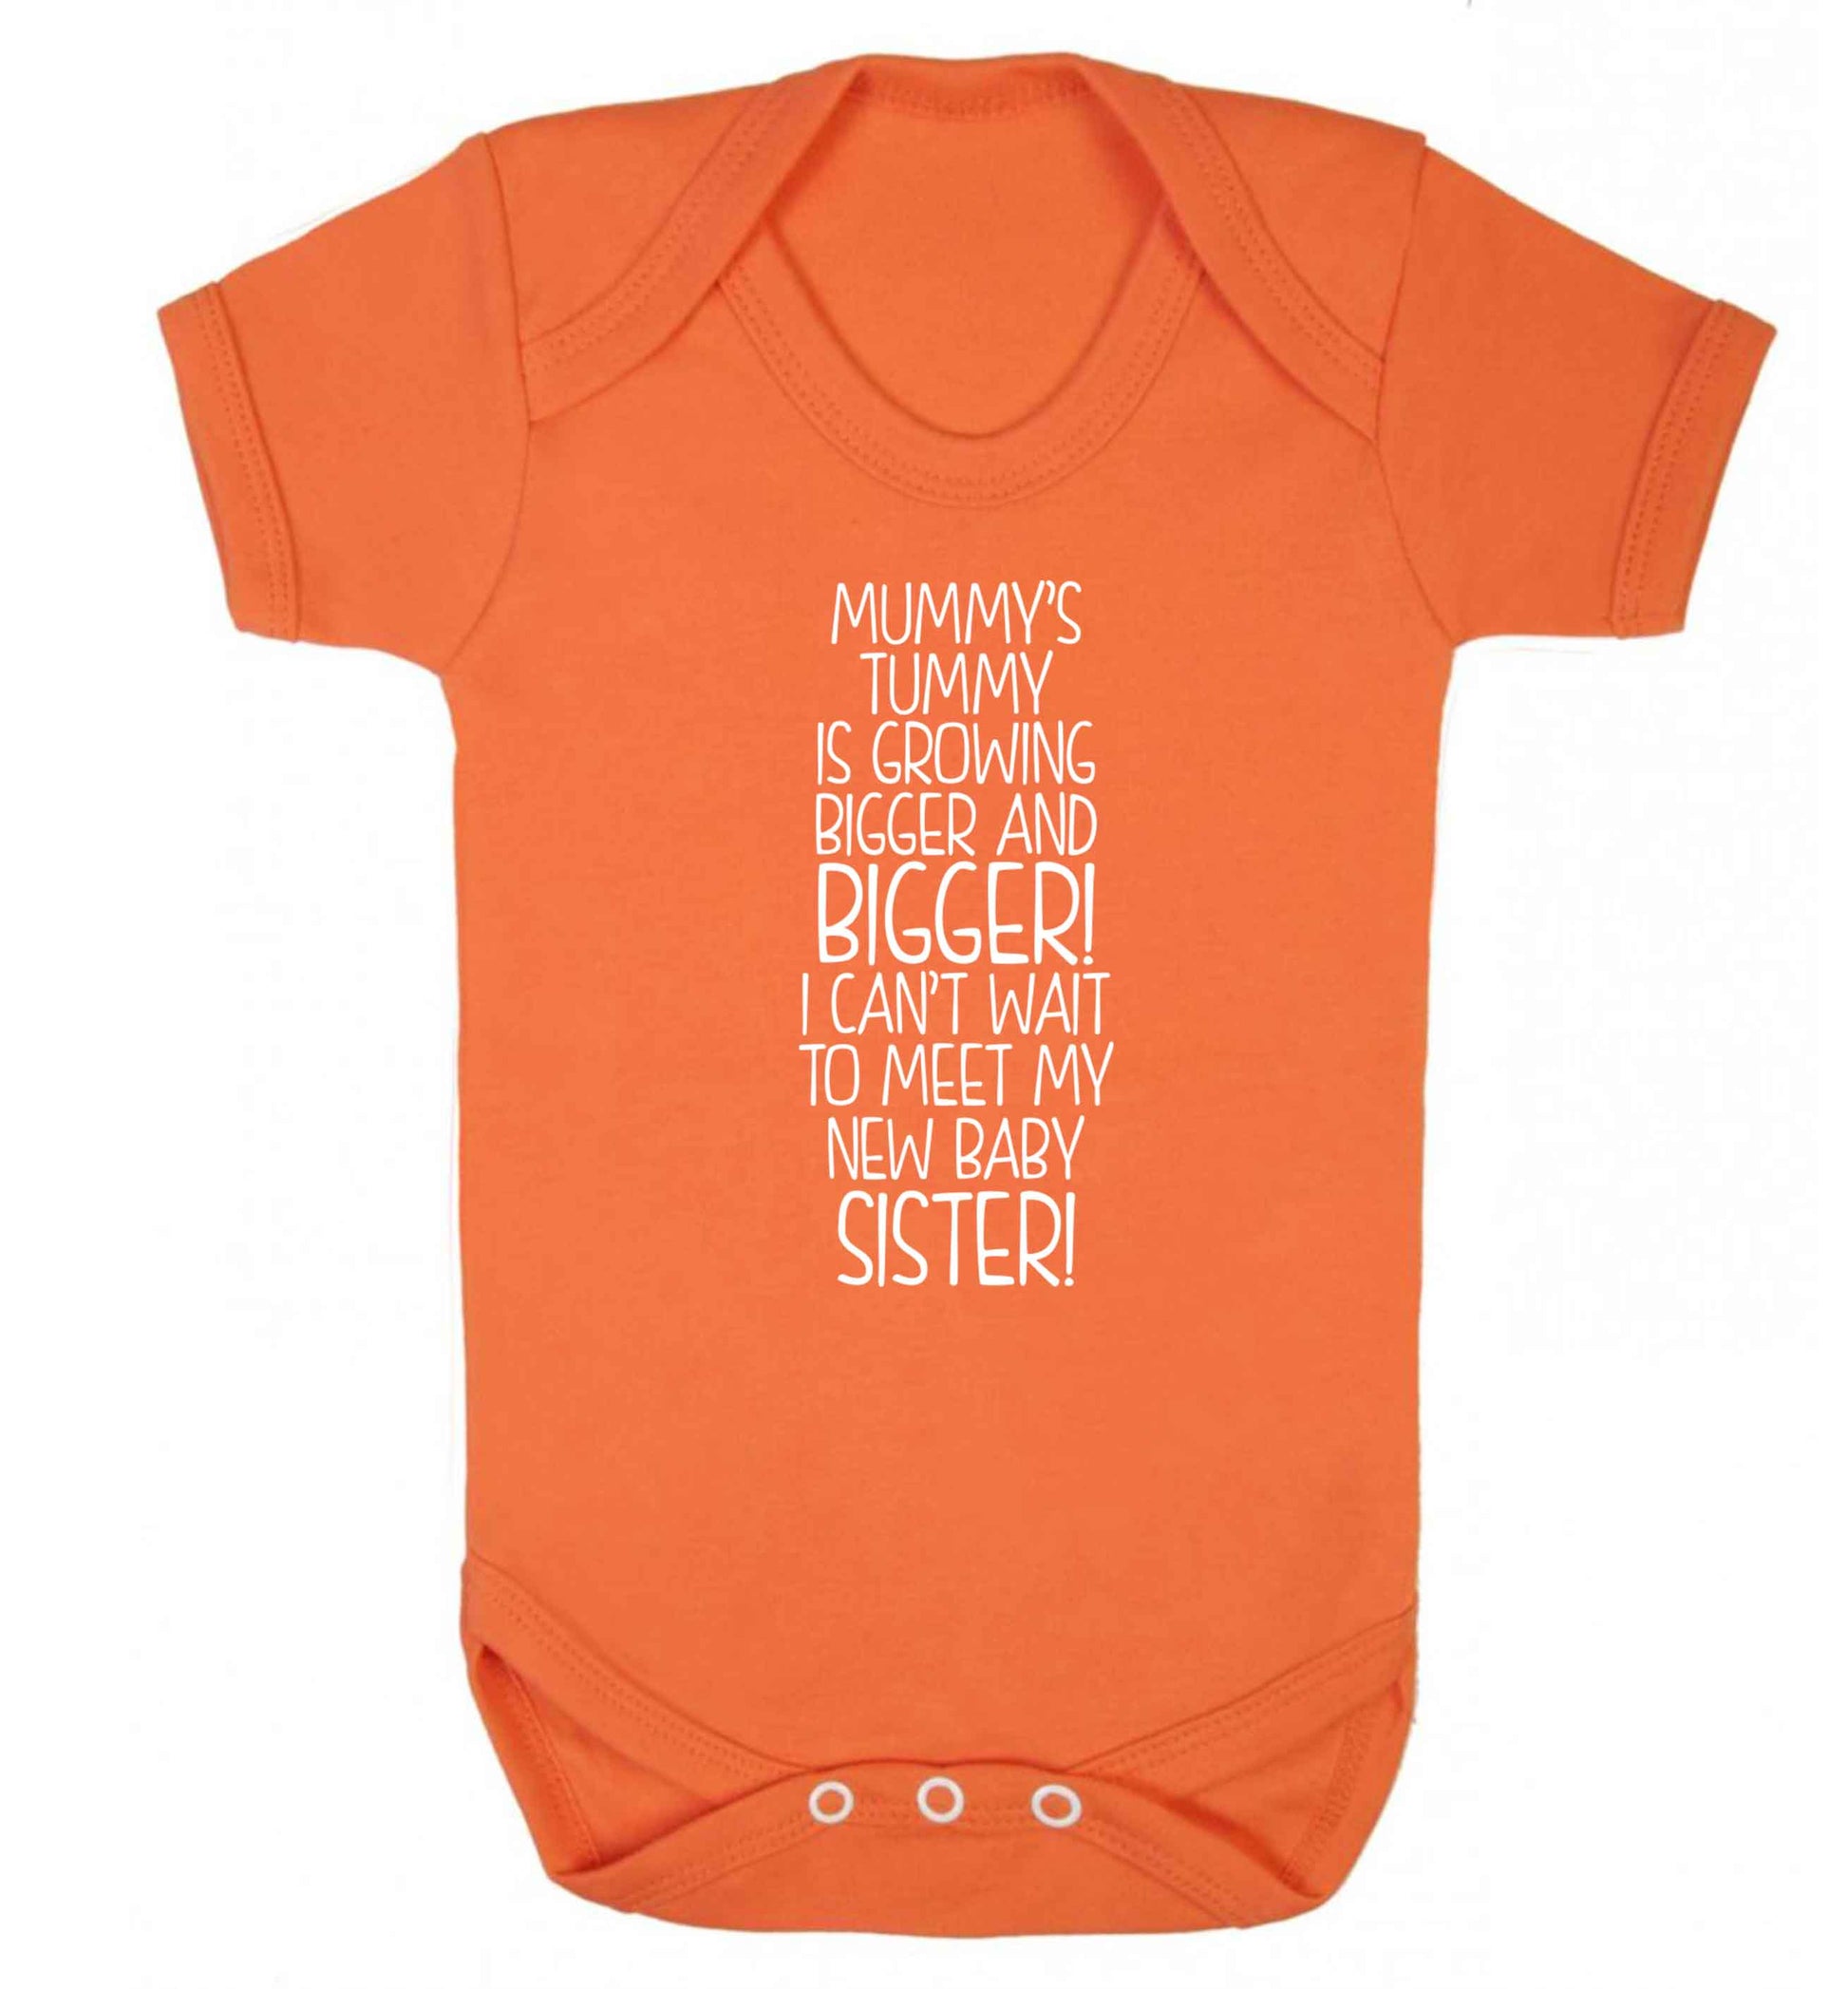 Mummy's tummy is growing bigger and bigger I can't wait to meet my new baby sister! Baby Vest orange 18-24 months